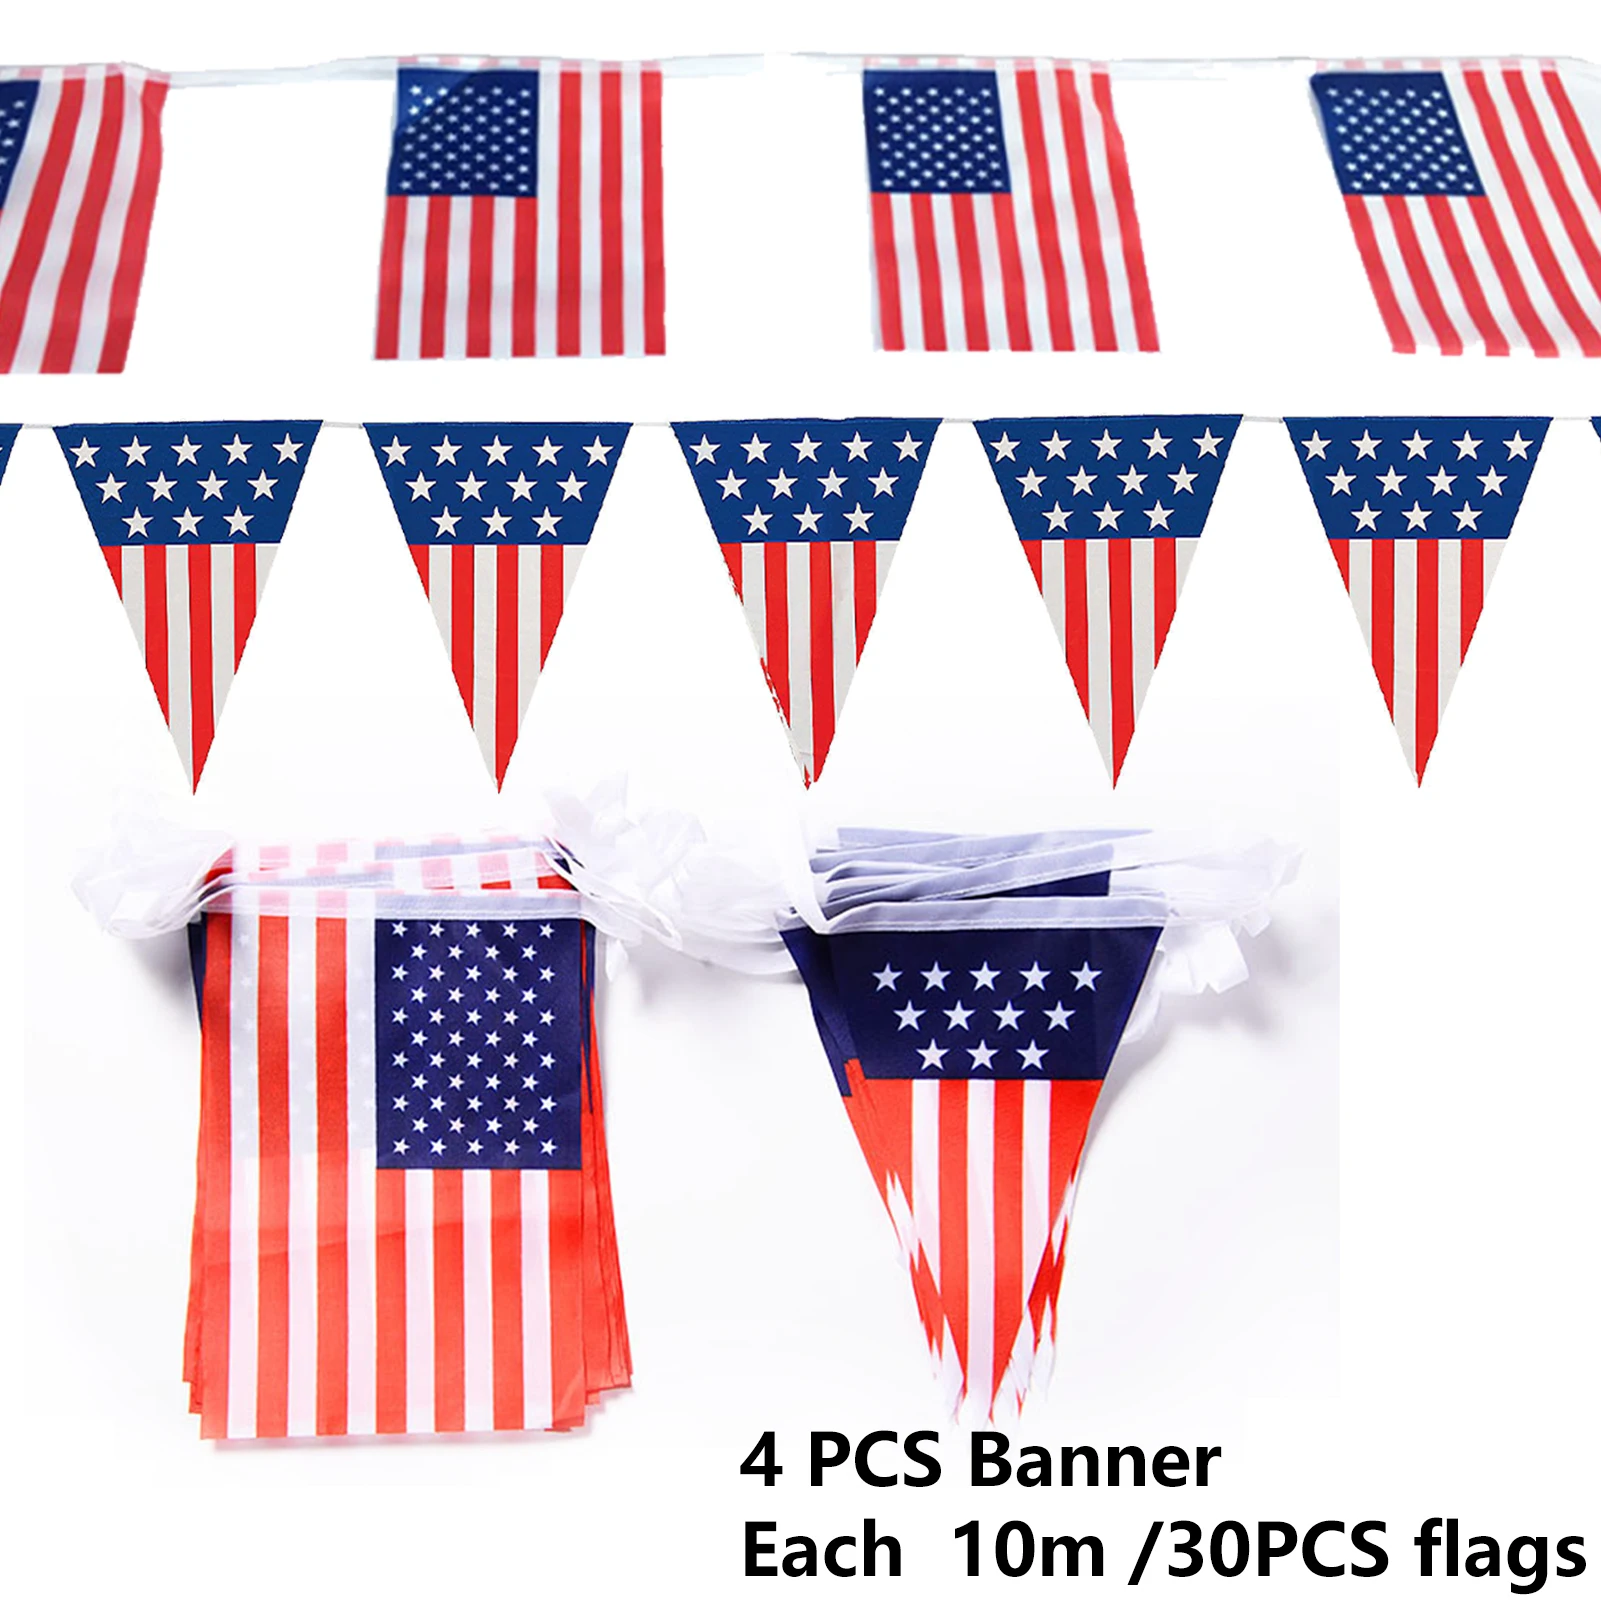 

4pcs Small Independence Day Indoor Outdoor Party Decorations Exquisite American Flag Bunting Banner Memorial Patriotic Festive